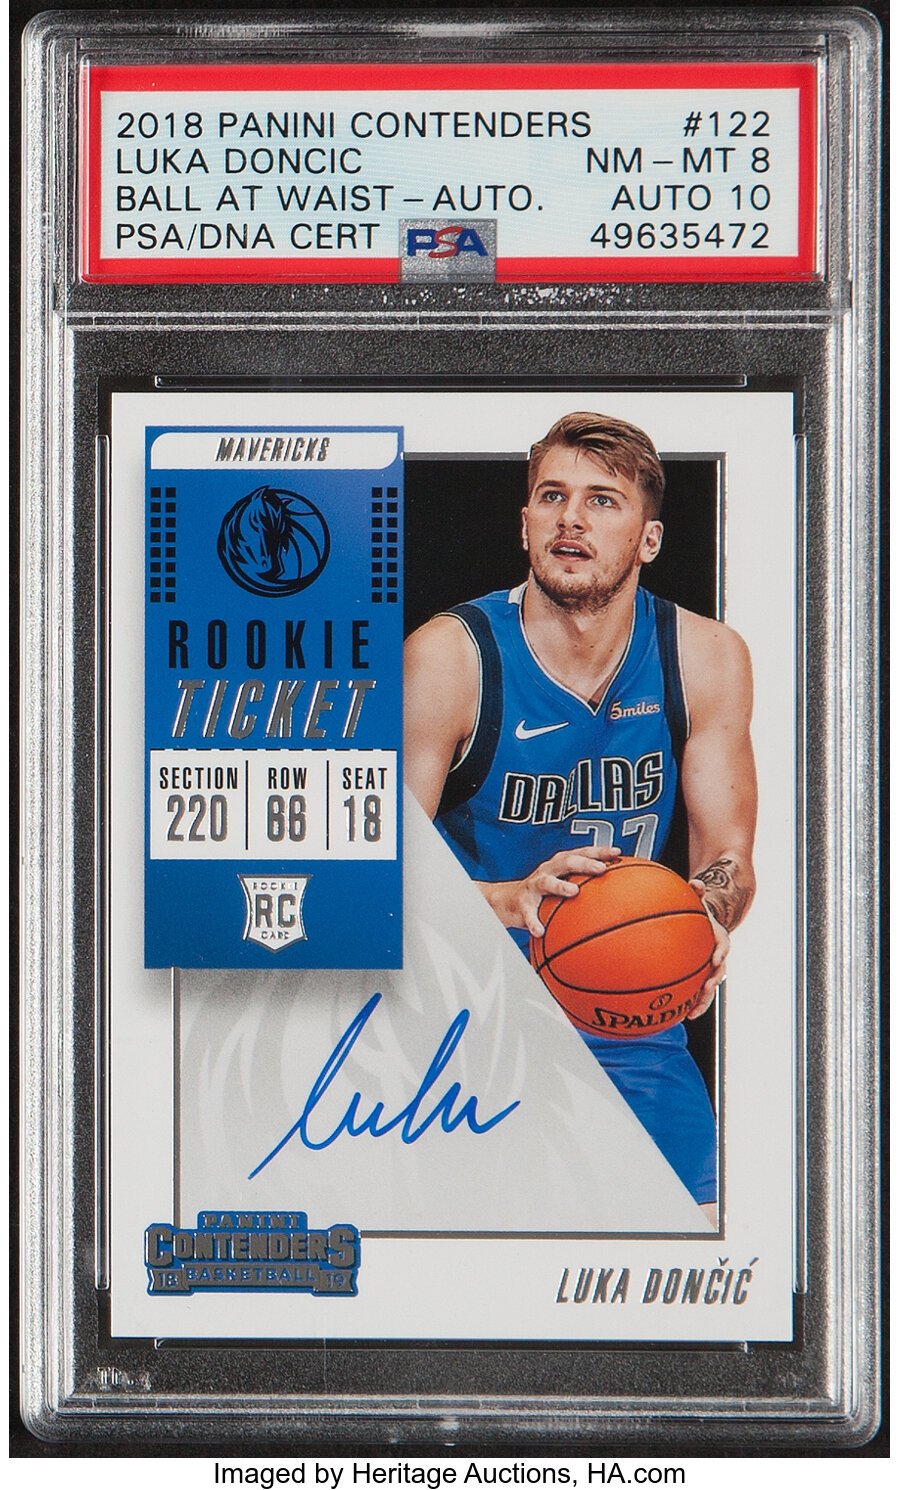 2018 Panini Contenders Luka Doncic (Rookie Ticket Autograph) #122 PSA NM-MT 8, Auto 10